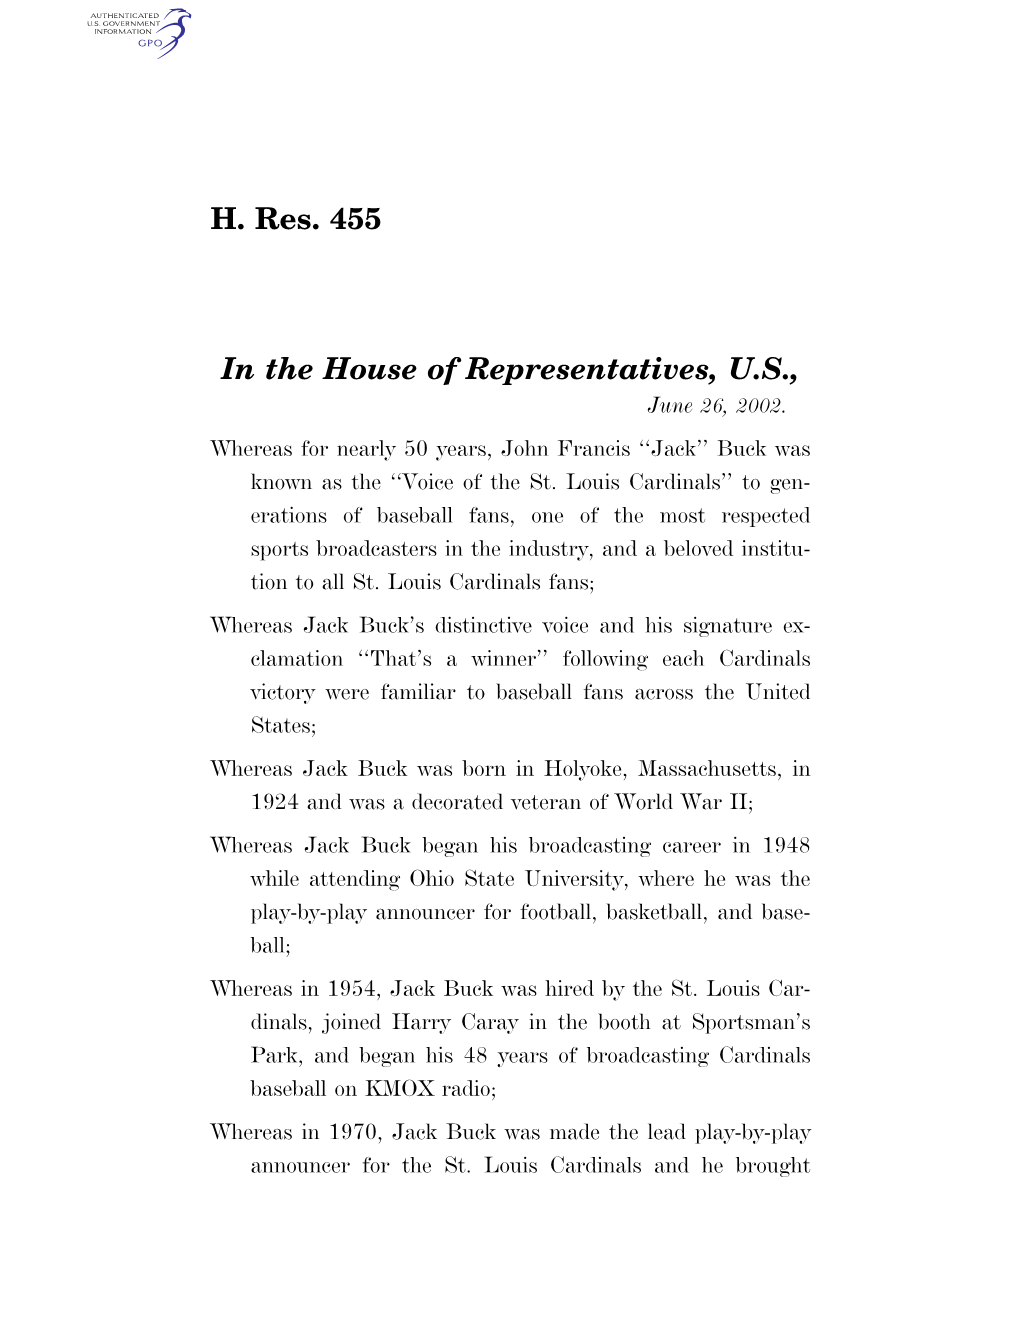 H. Res. 455 in the House of Representatives, U.S